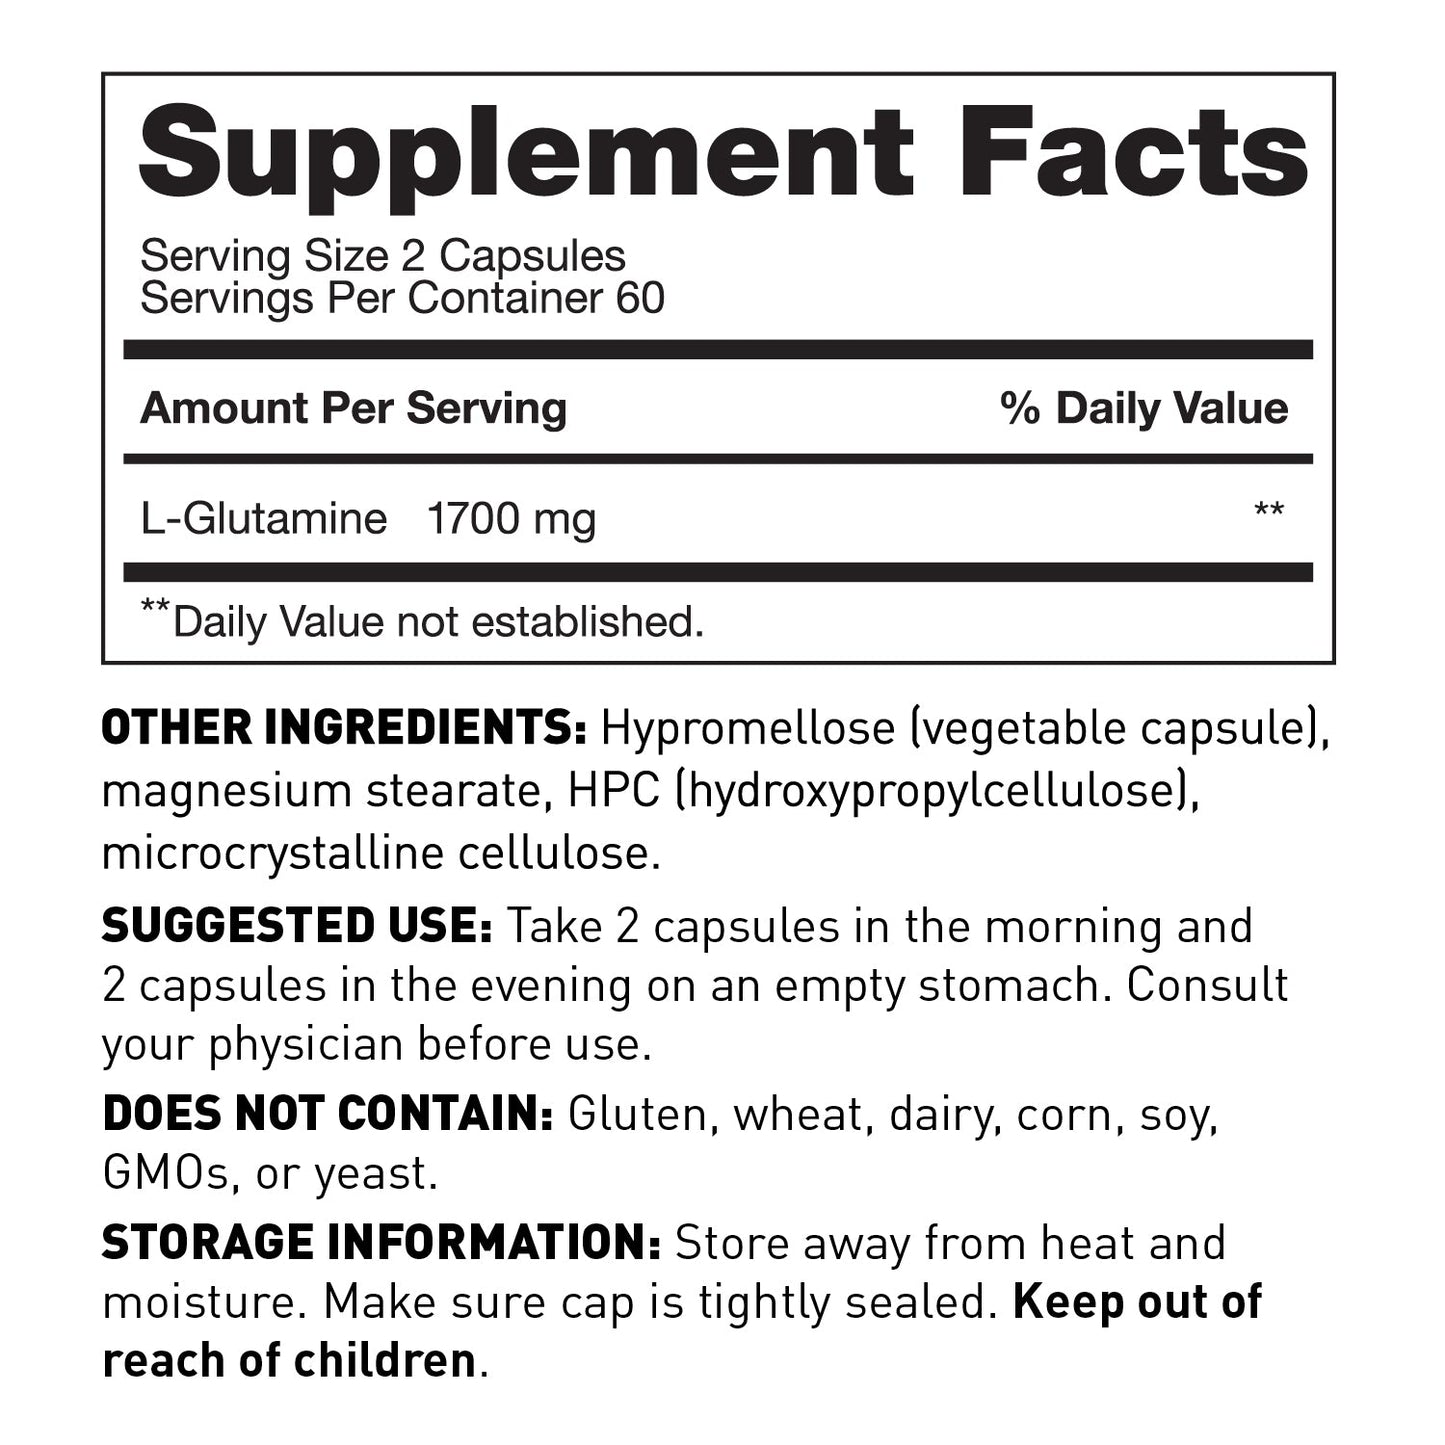 L-Glutamine Capsules by Amy Myers MD